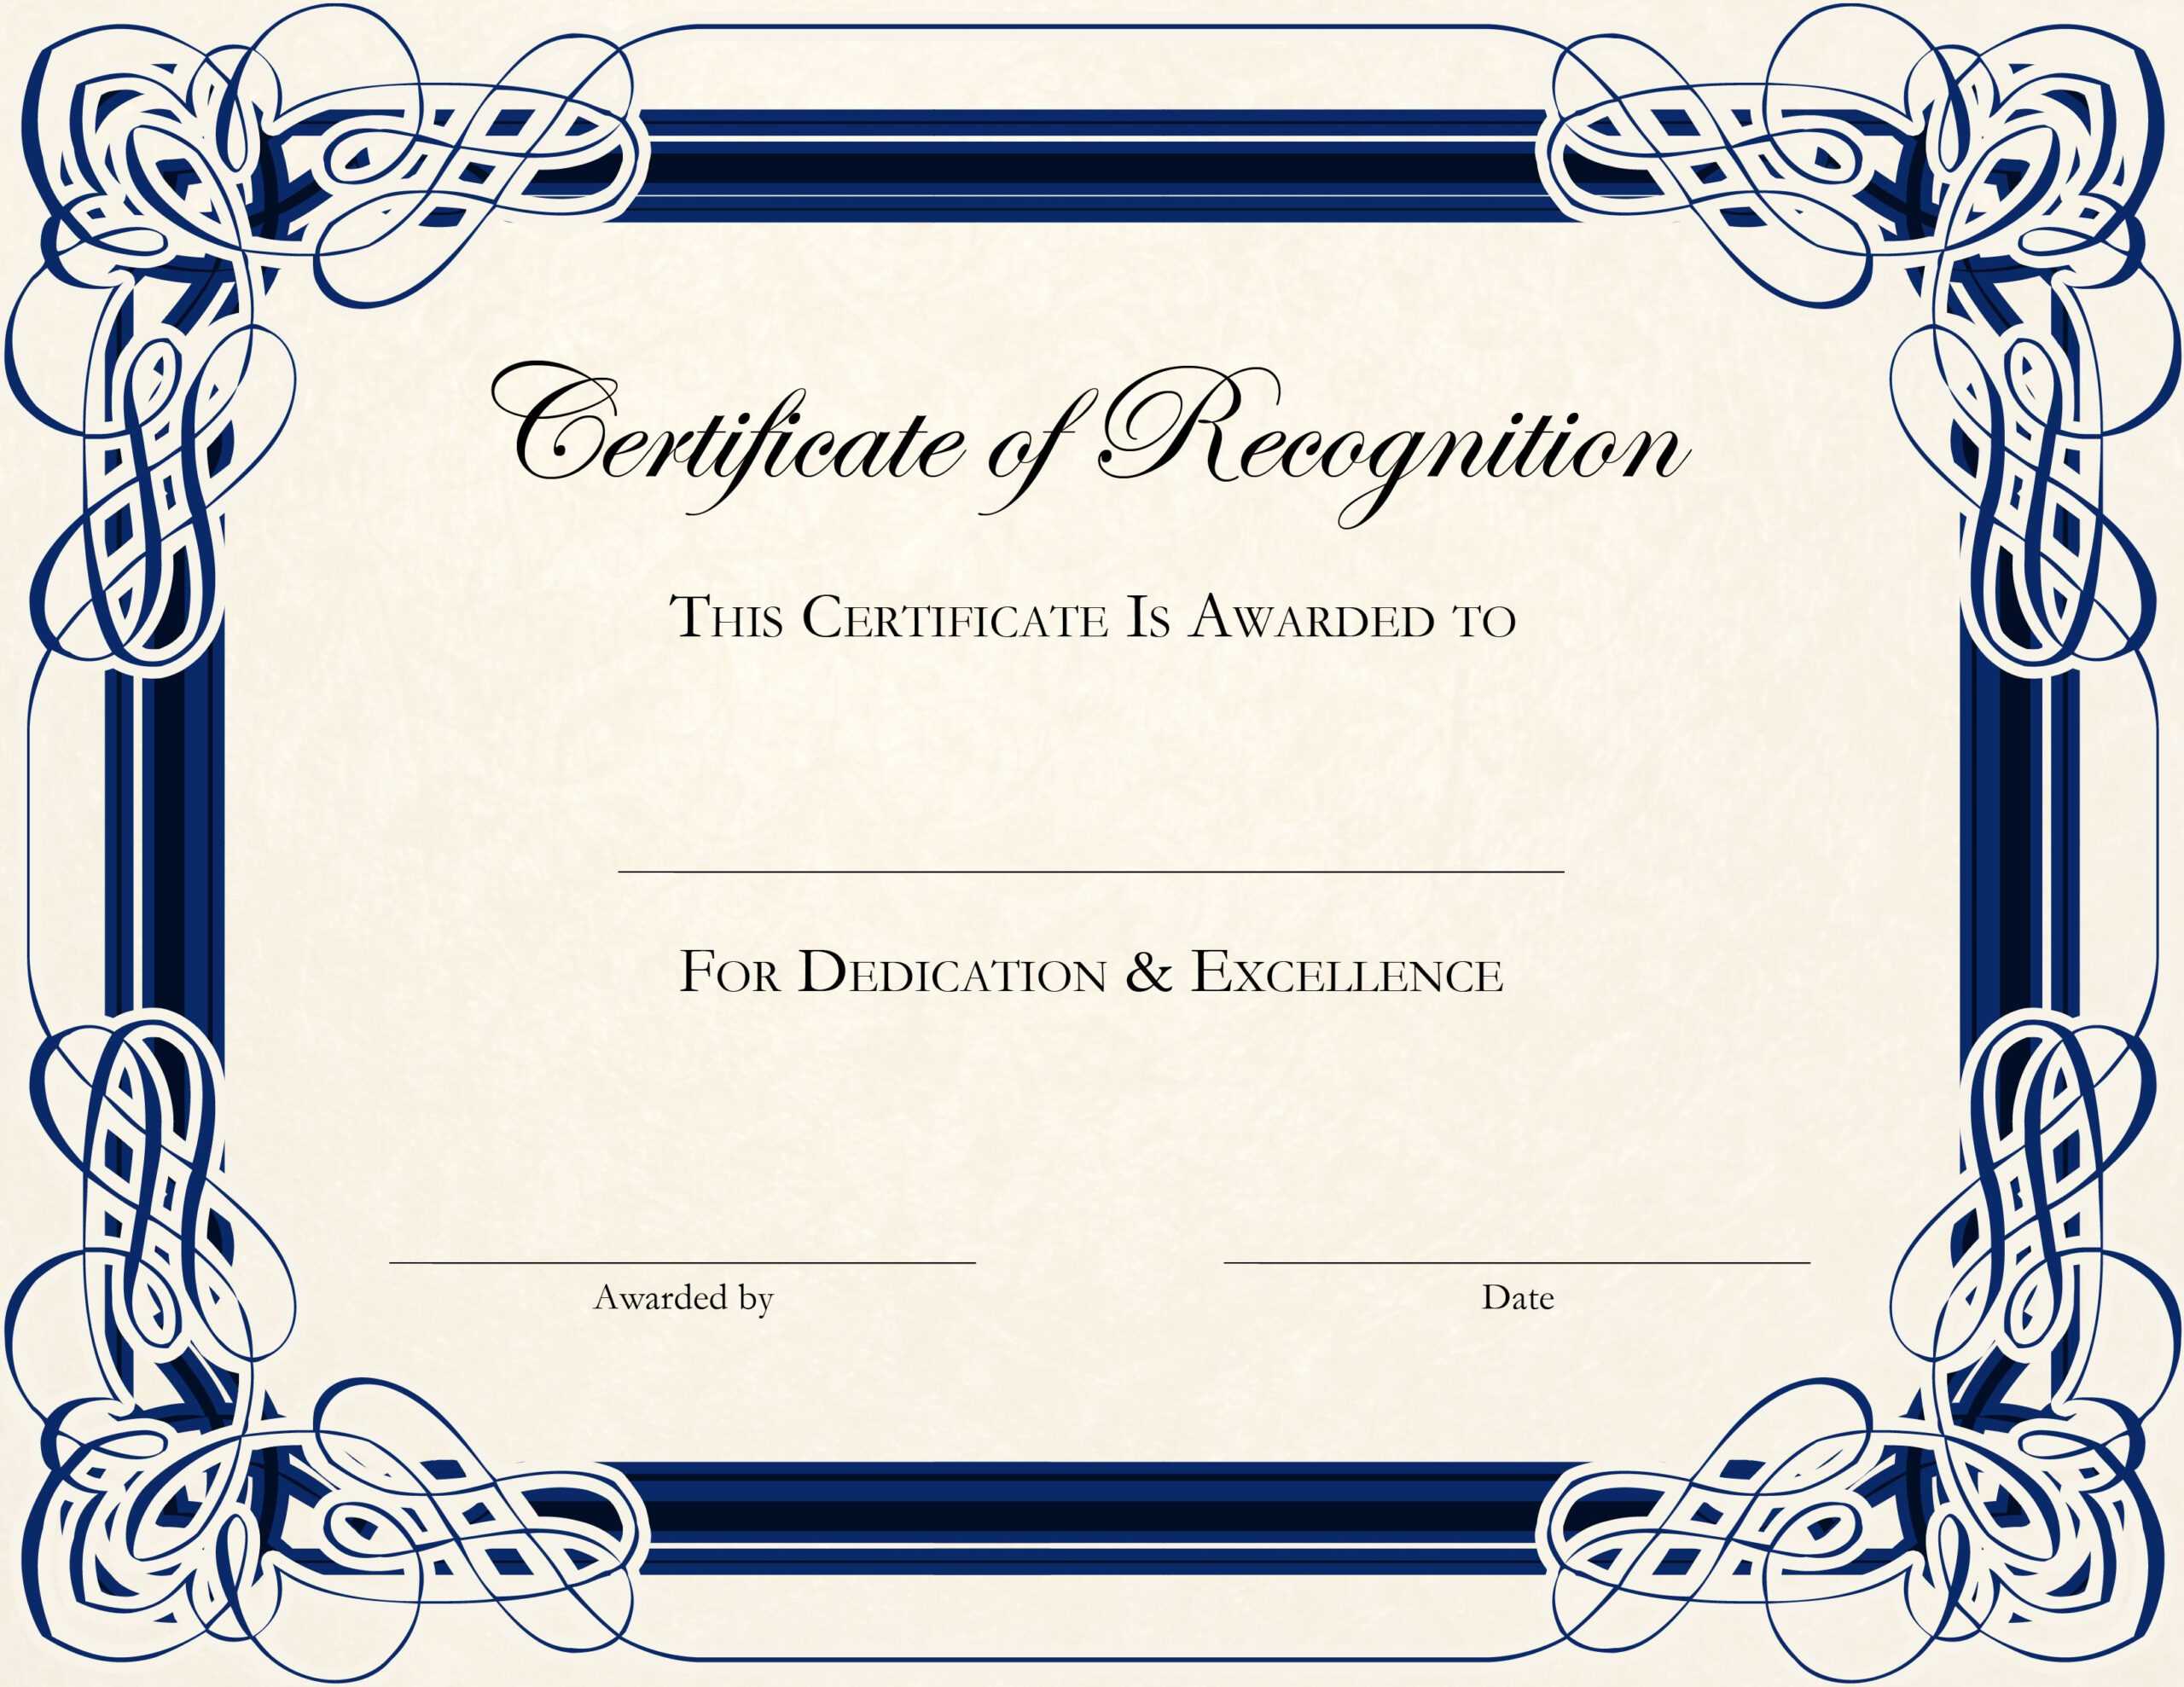 Certificate Template Designs Recognition Docs | Certificate Intended For Printable Certificate Of Recognition Templates Free